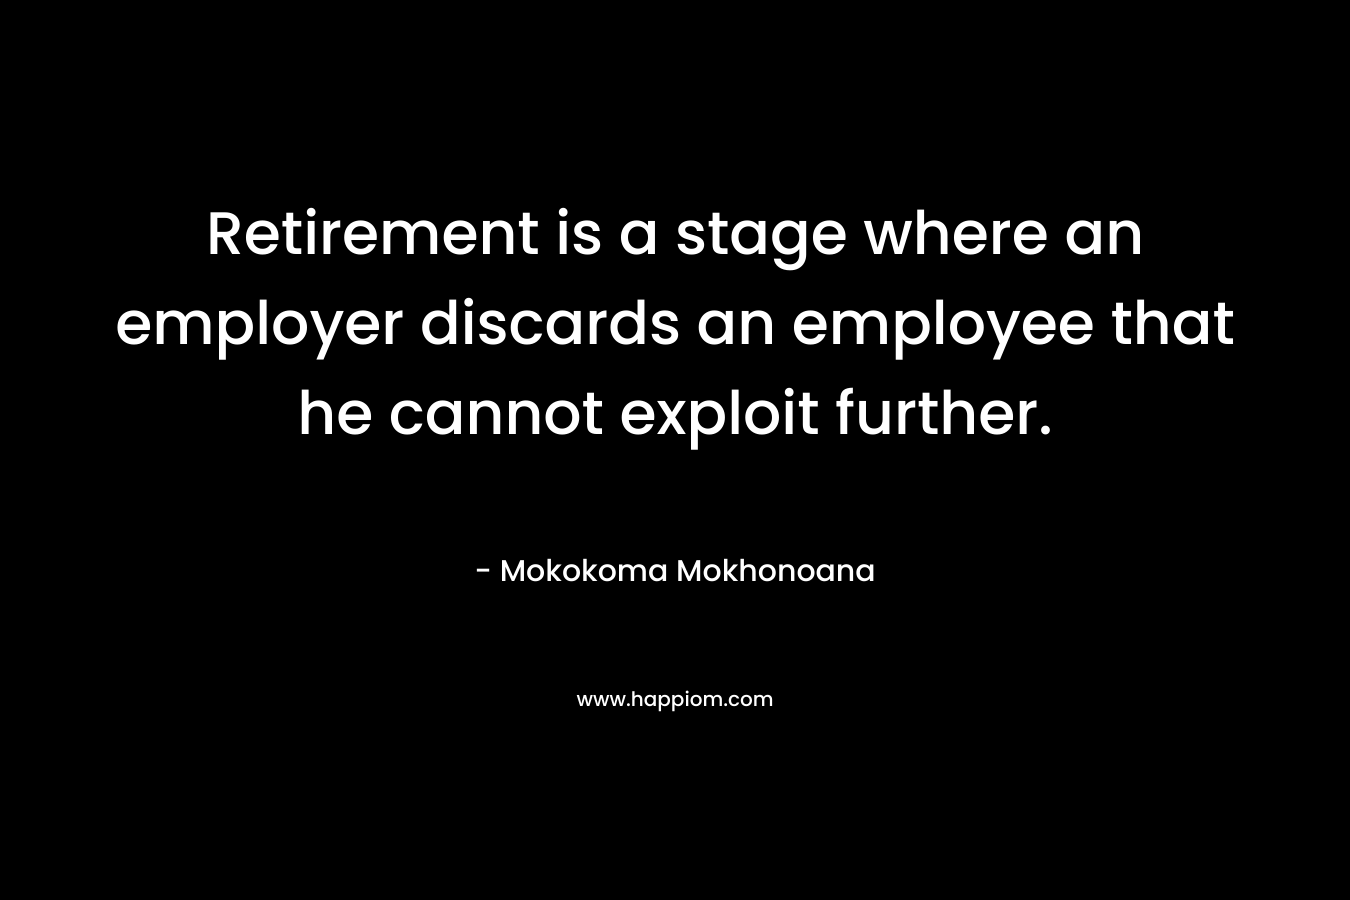 Retirement is a stage where an employer discards an employee that he cannot exploit further.